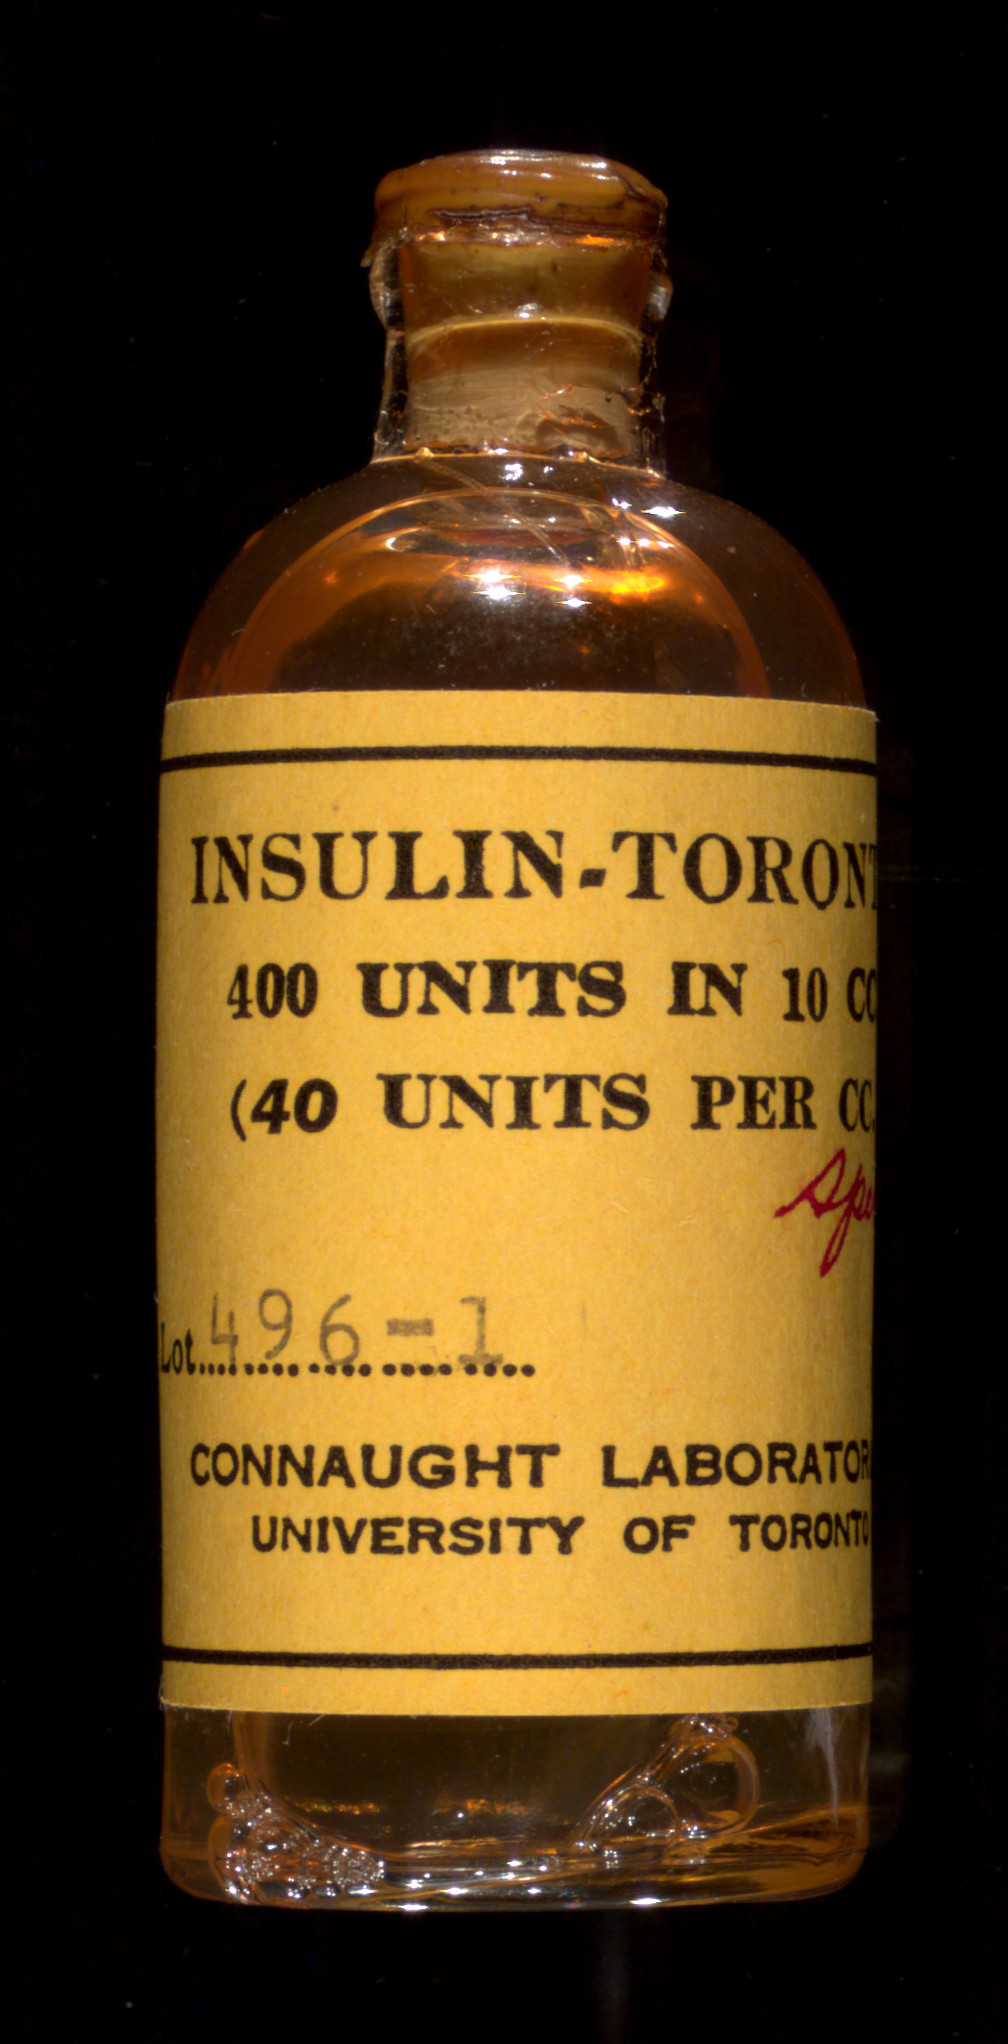 Bottle of insulin from Connaught Medical Research Laboratories, 1925.